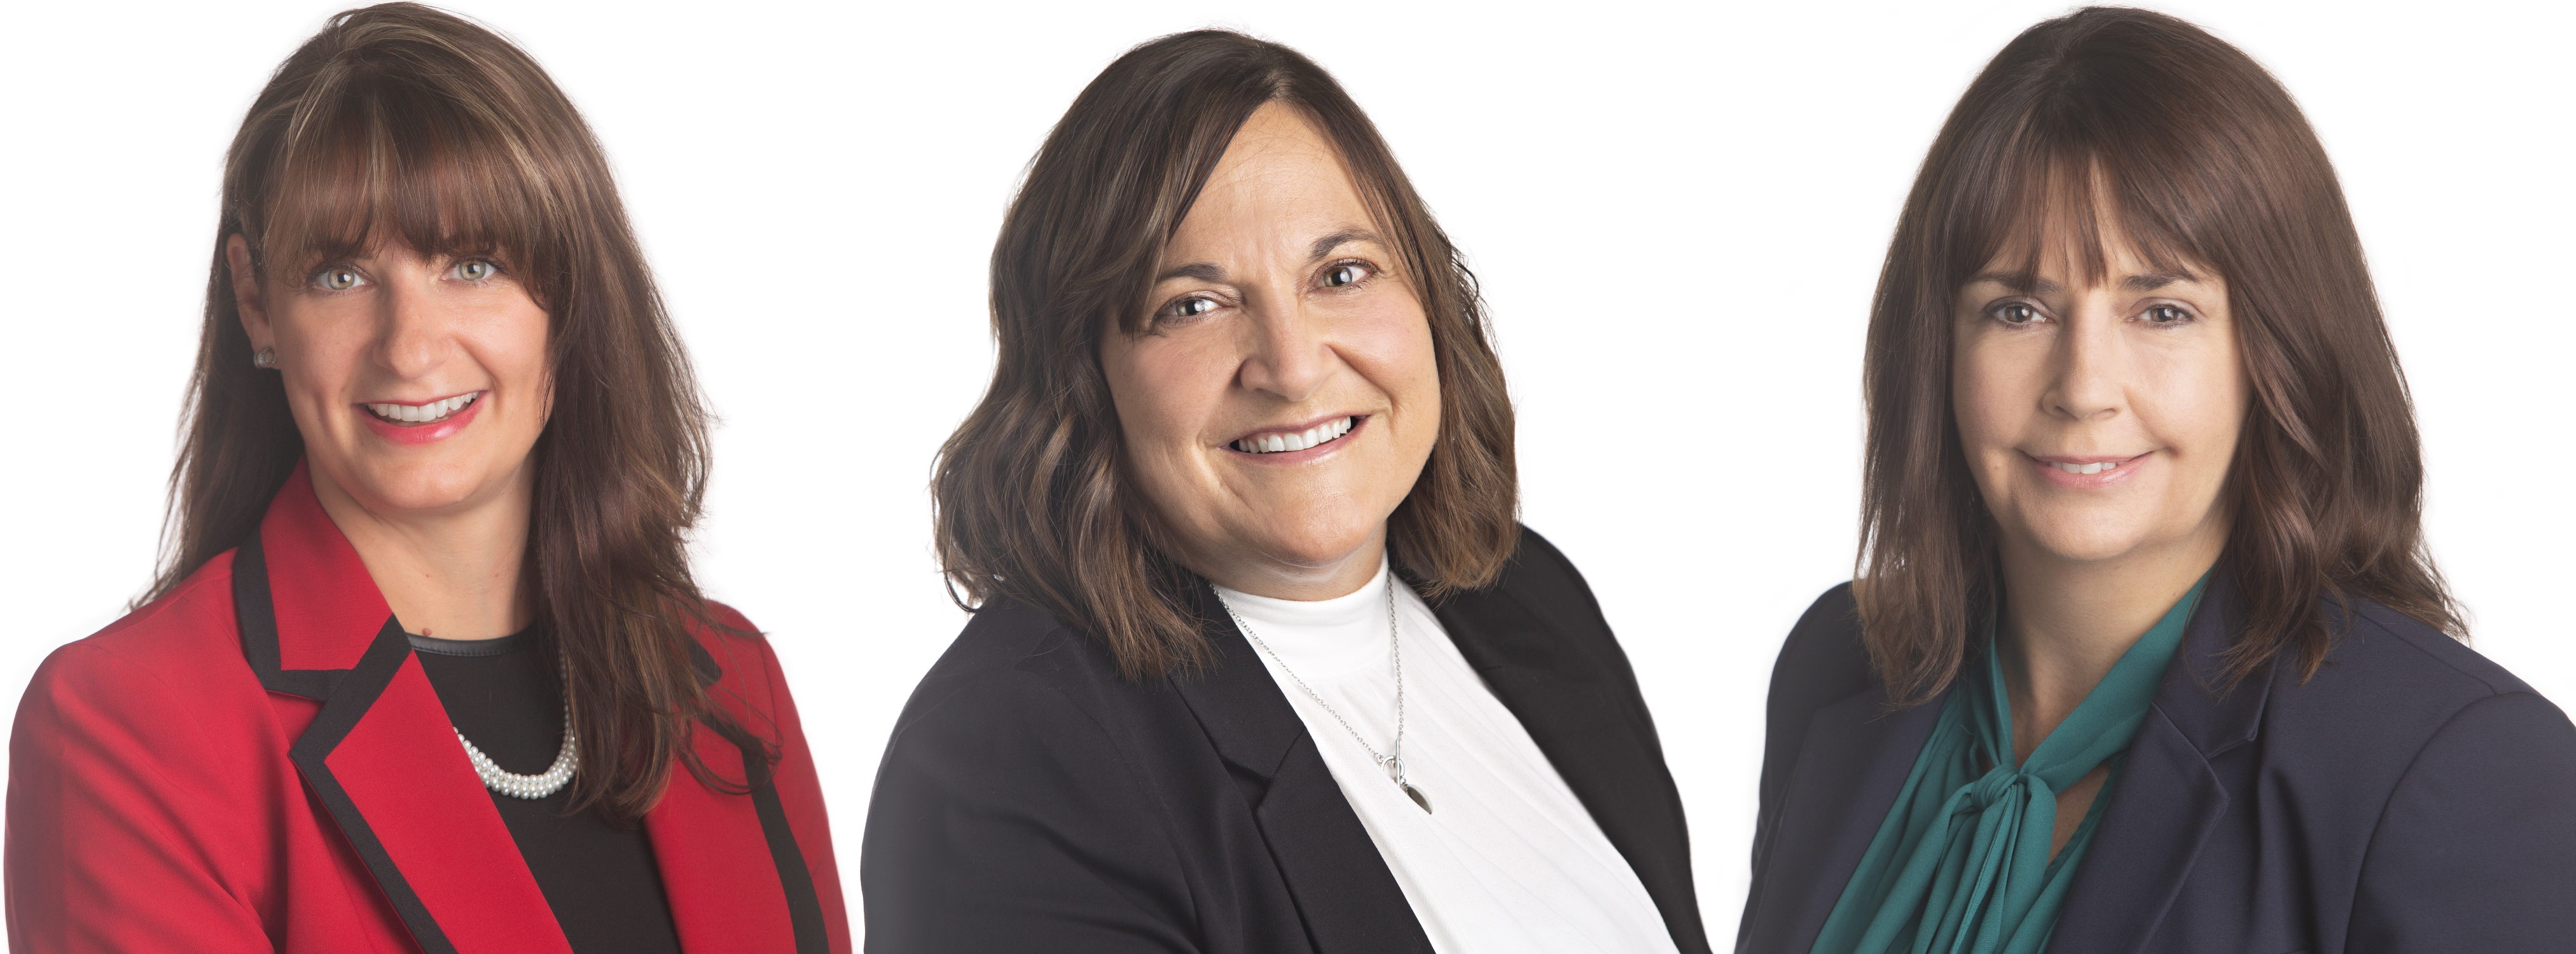 ARC CANADA EXPANSION CONTINUES WITH KEY HIRES IN REGULATORY,  FINANCE & ADMINISTRATION